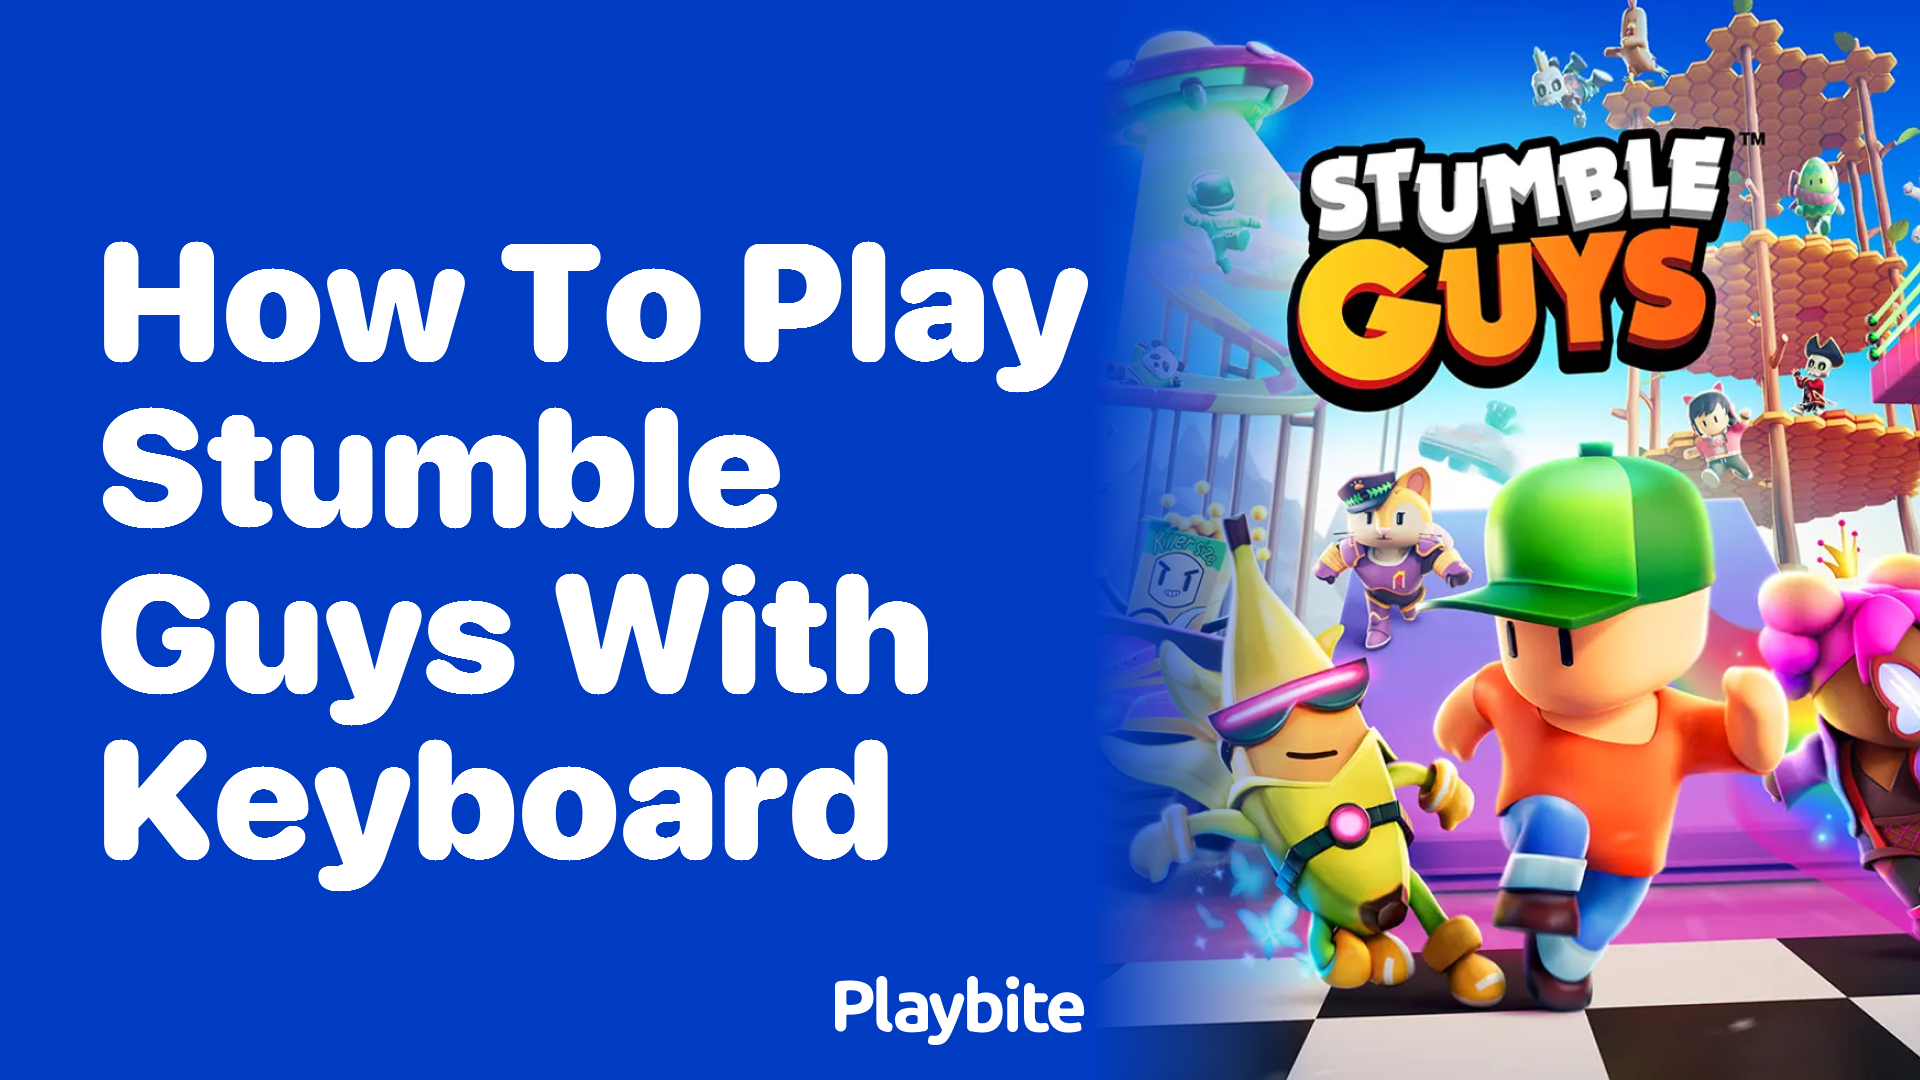 How to Play Stumble Guys with a Keyboard